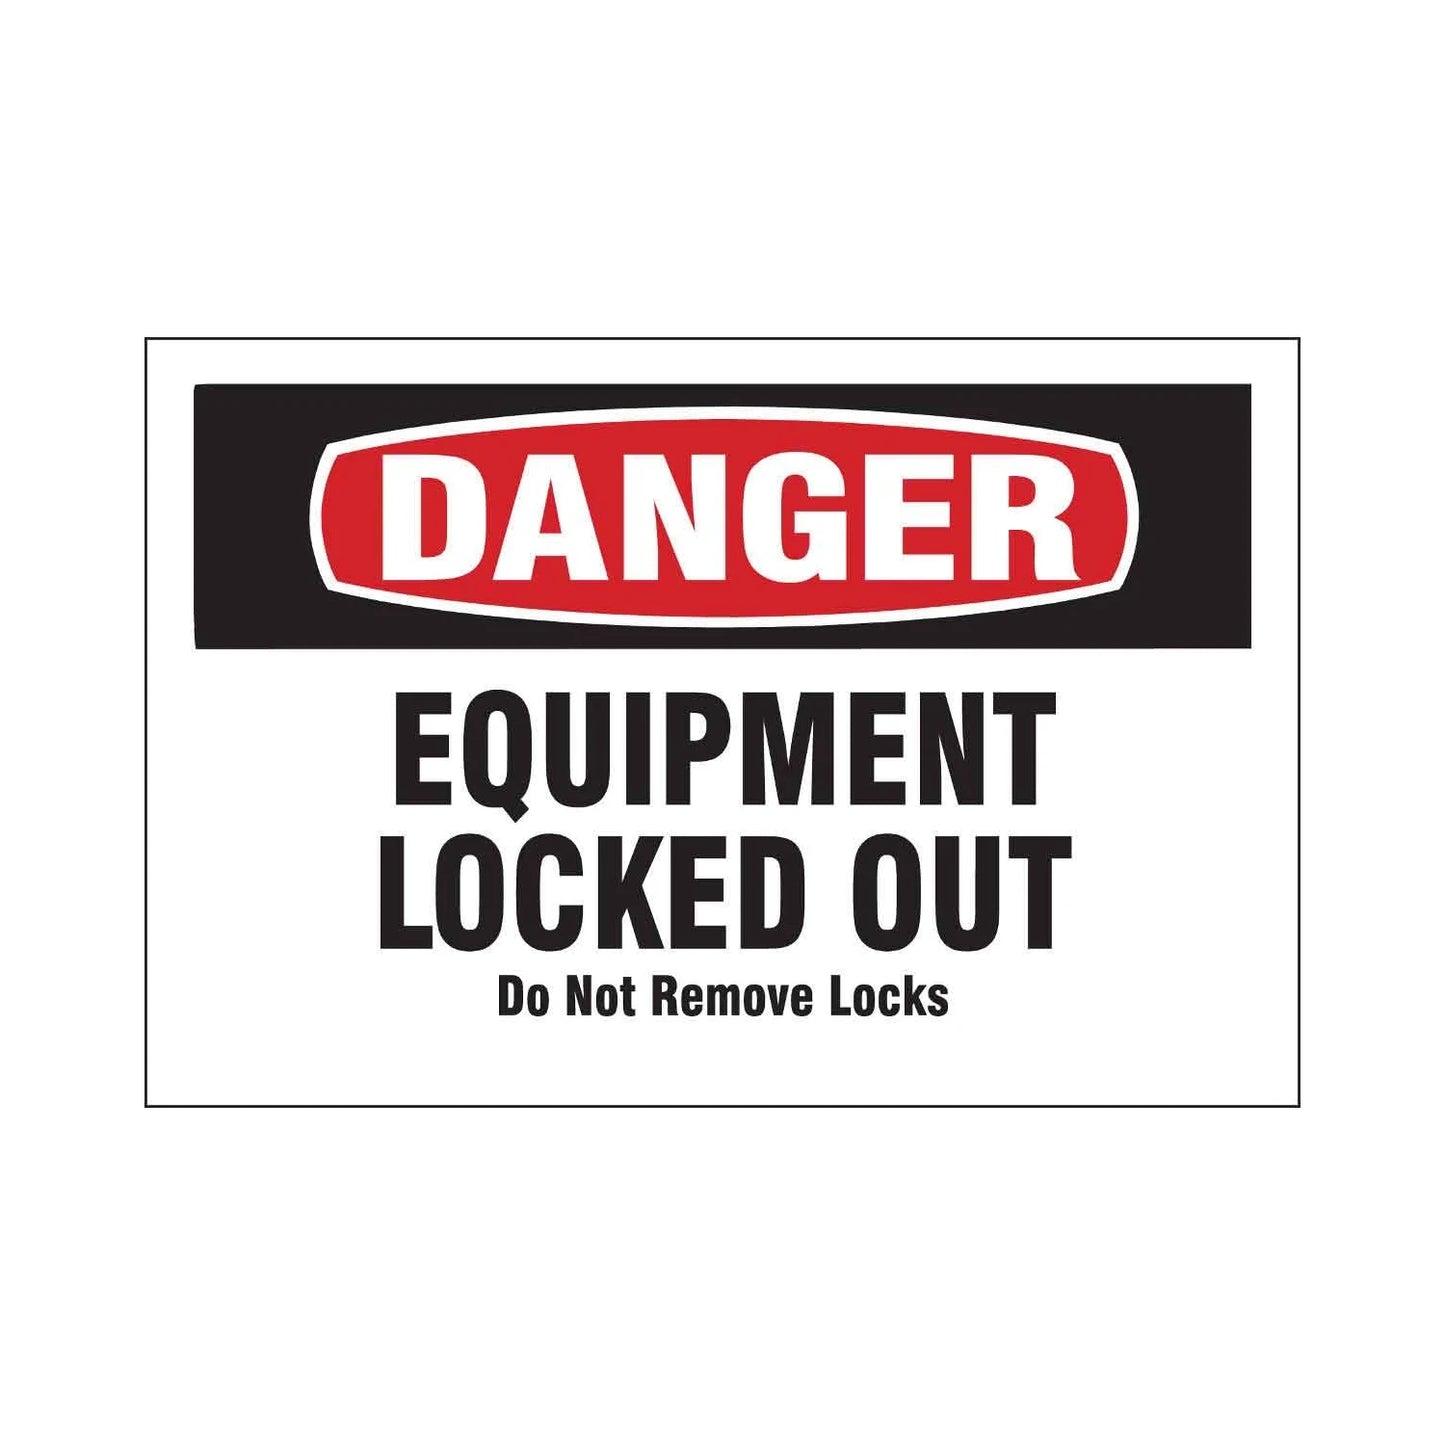 Equipment Locked Out Do Not Remove Locks Sign